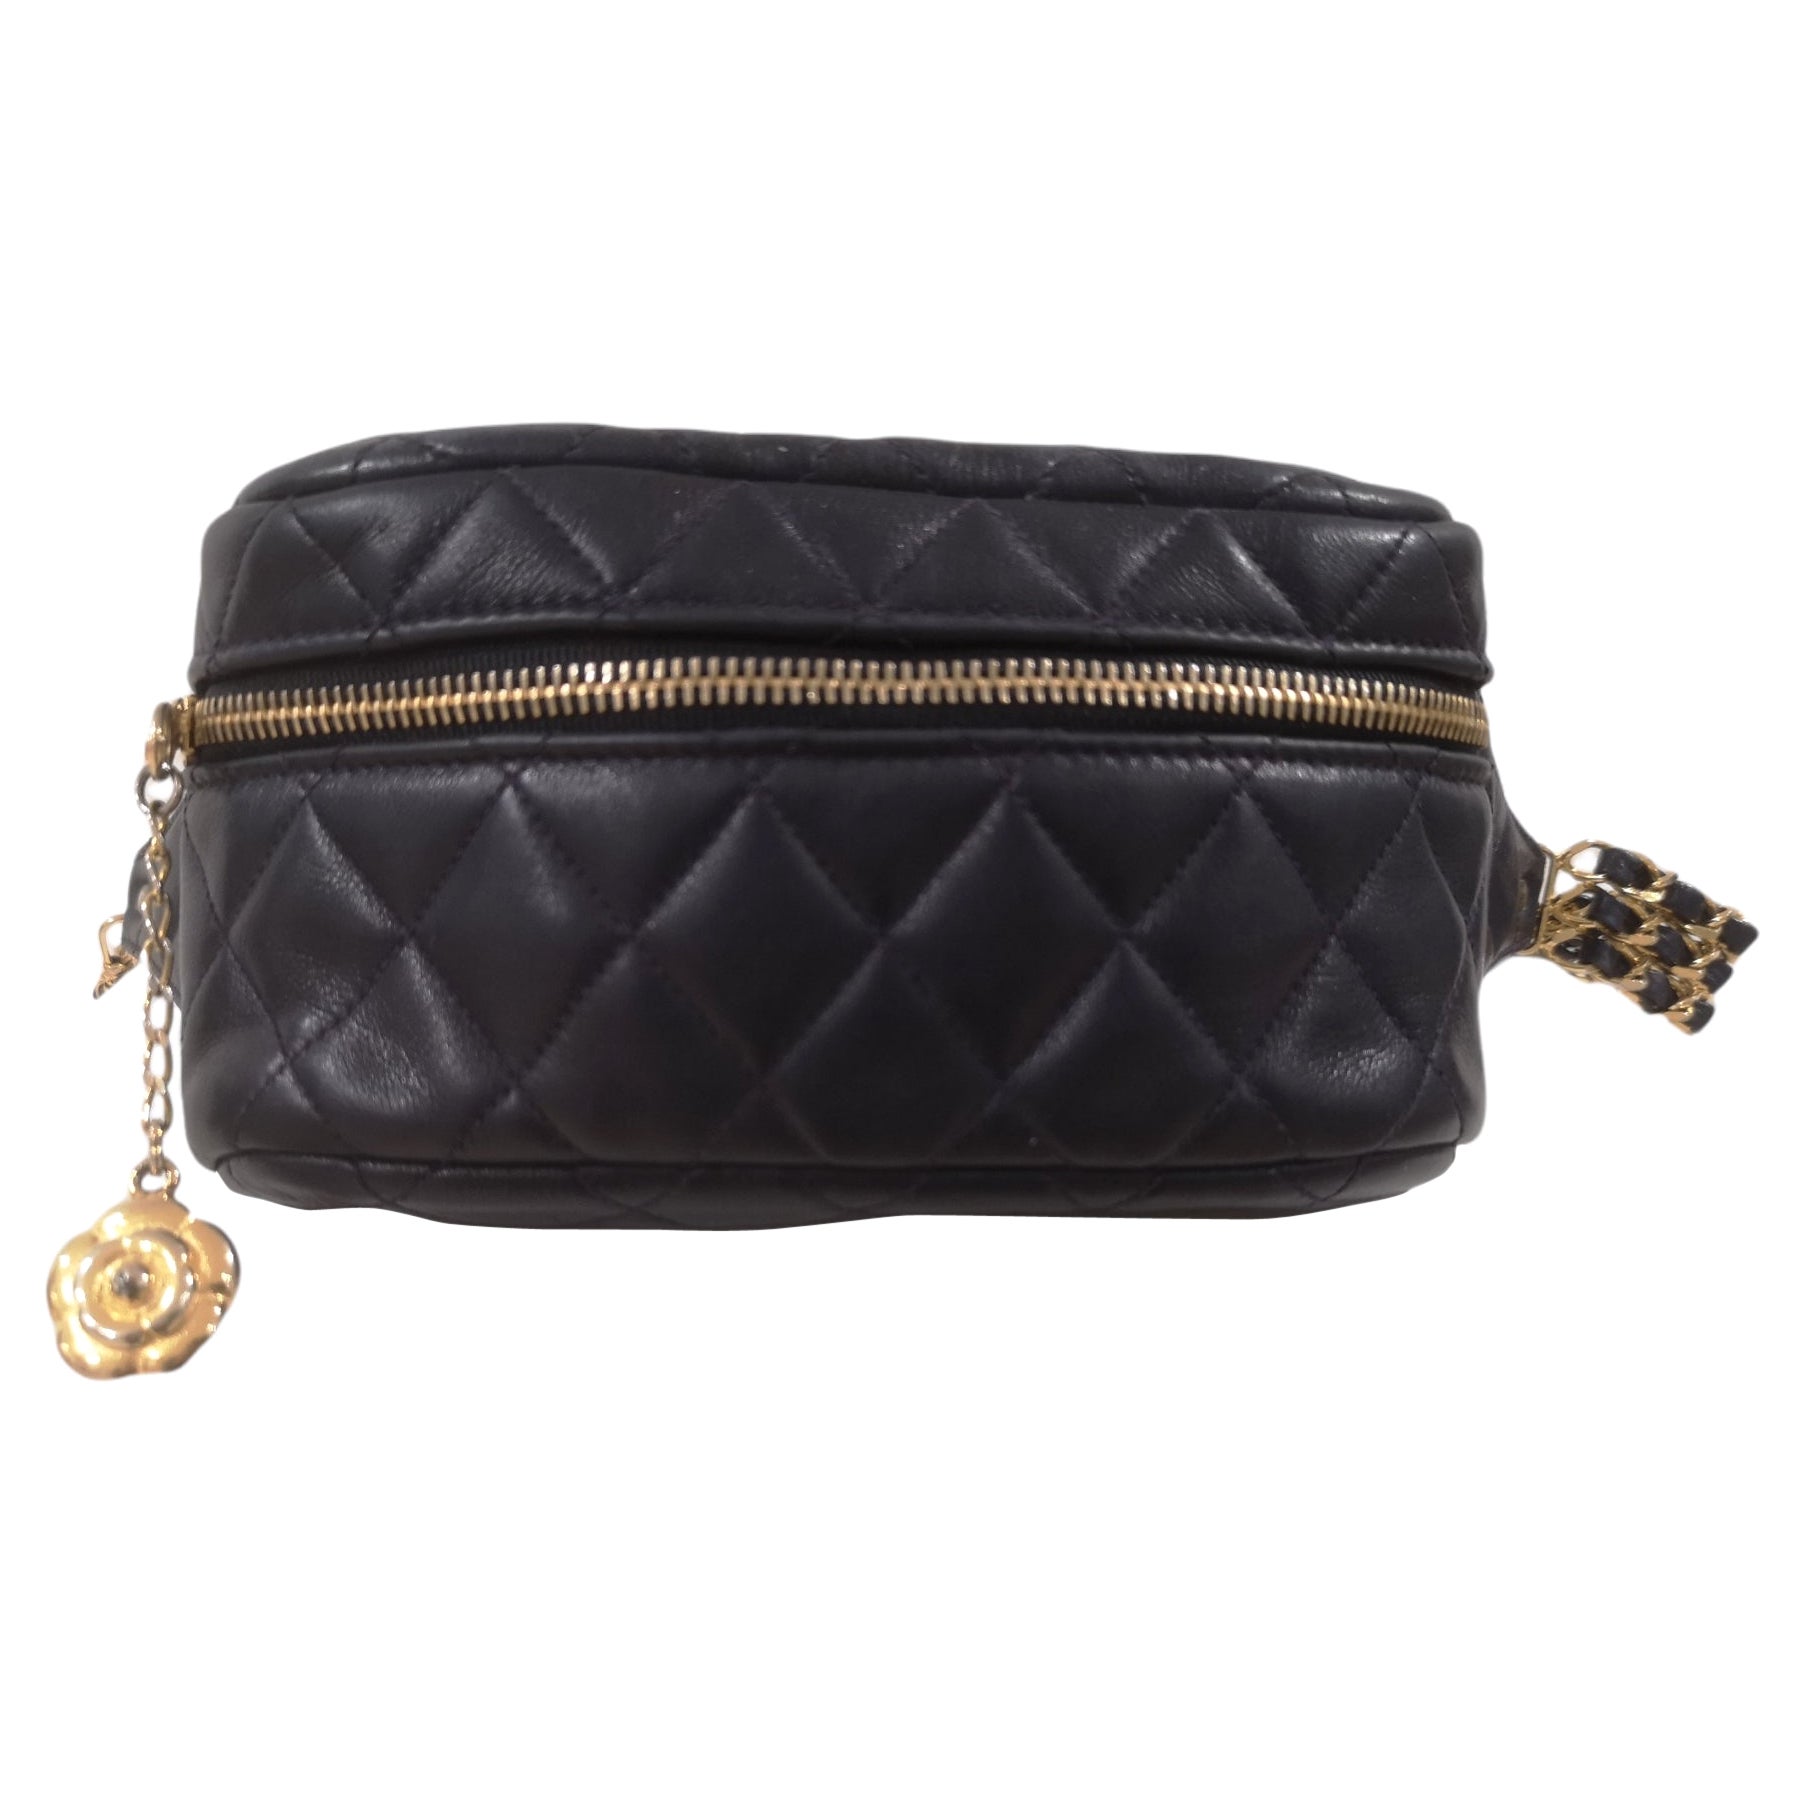 Chanel blue navy gold hardware fanny pack